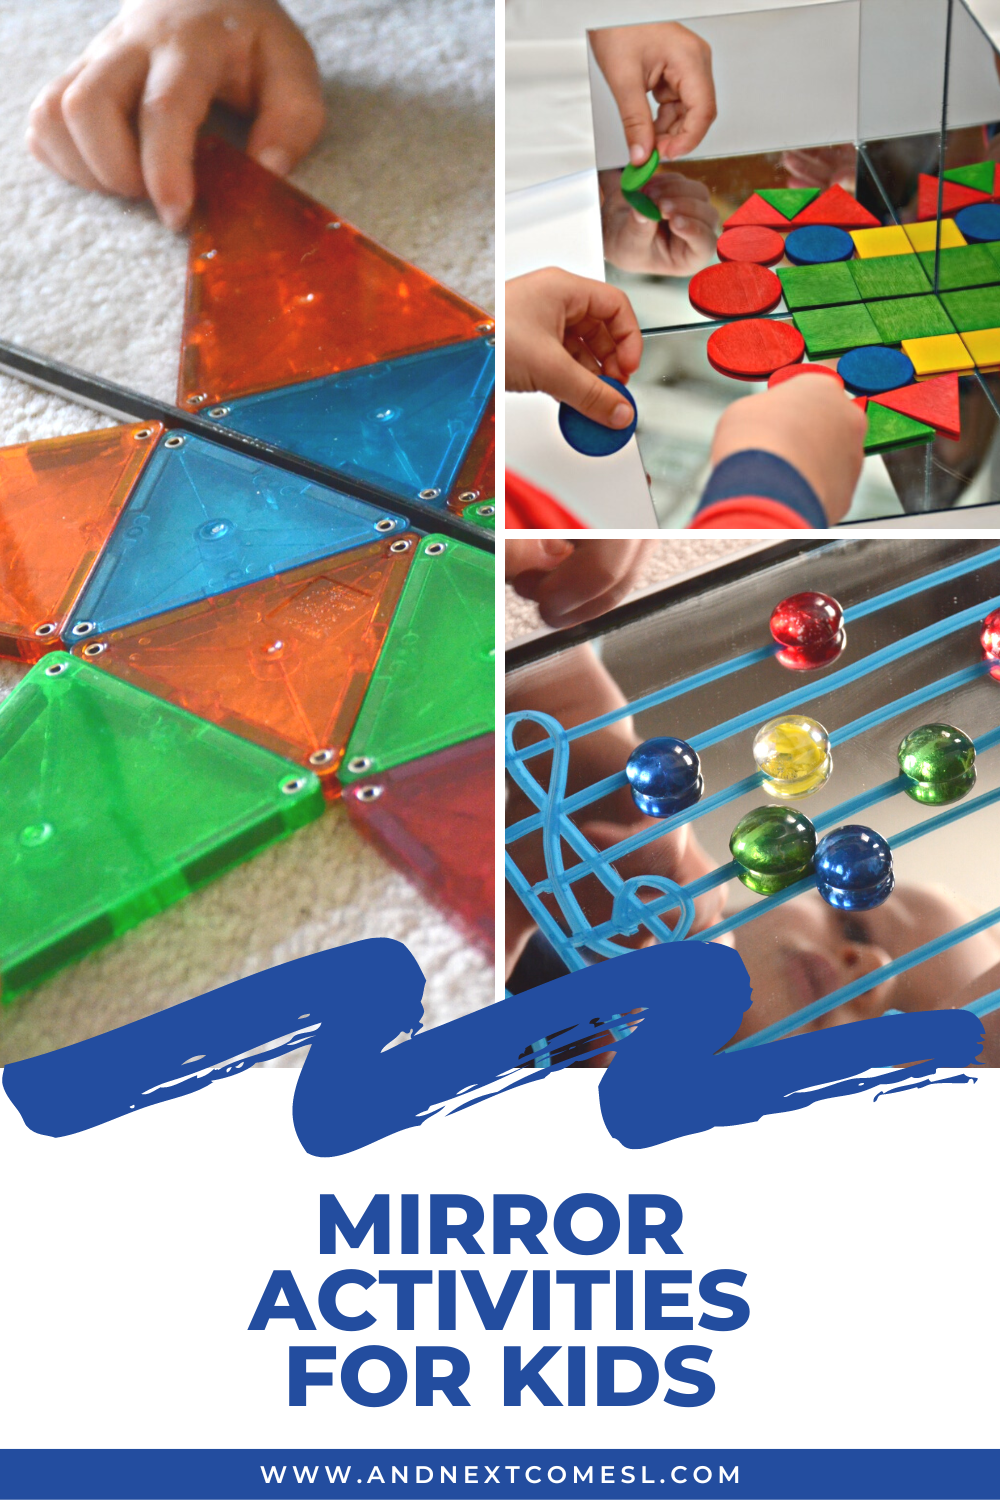 Fun mirror activities for kids - lots of great ideas for toddlers and preschoolers!